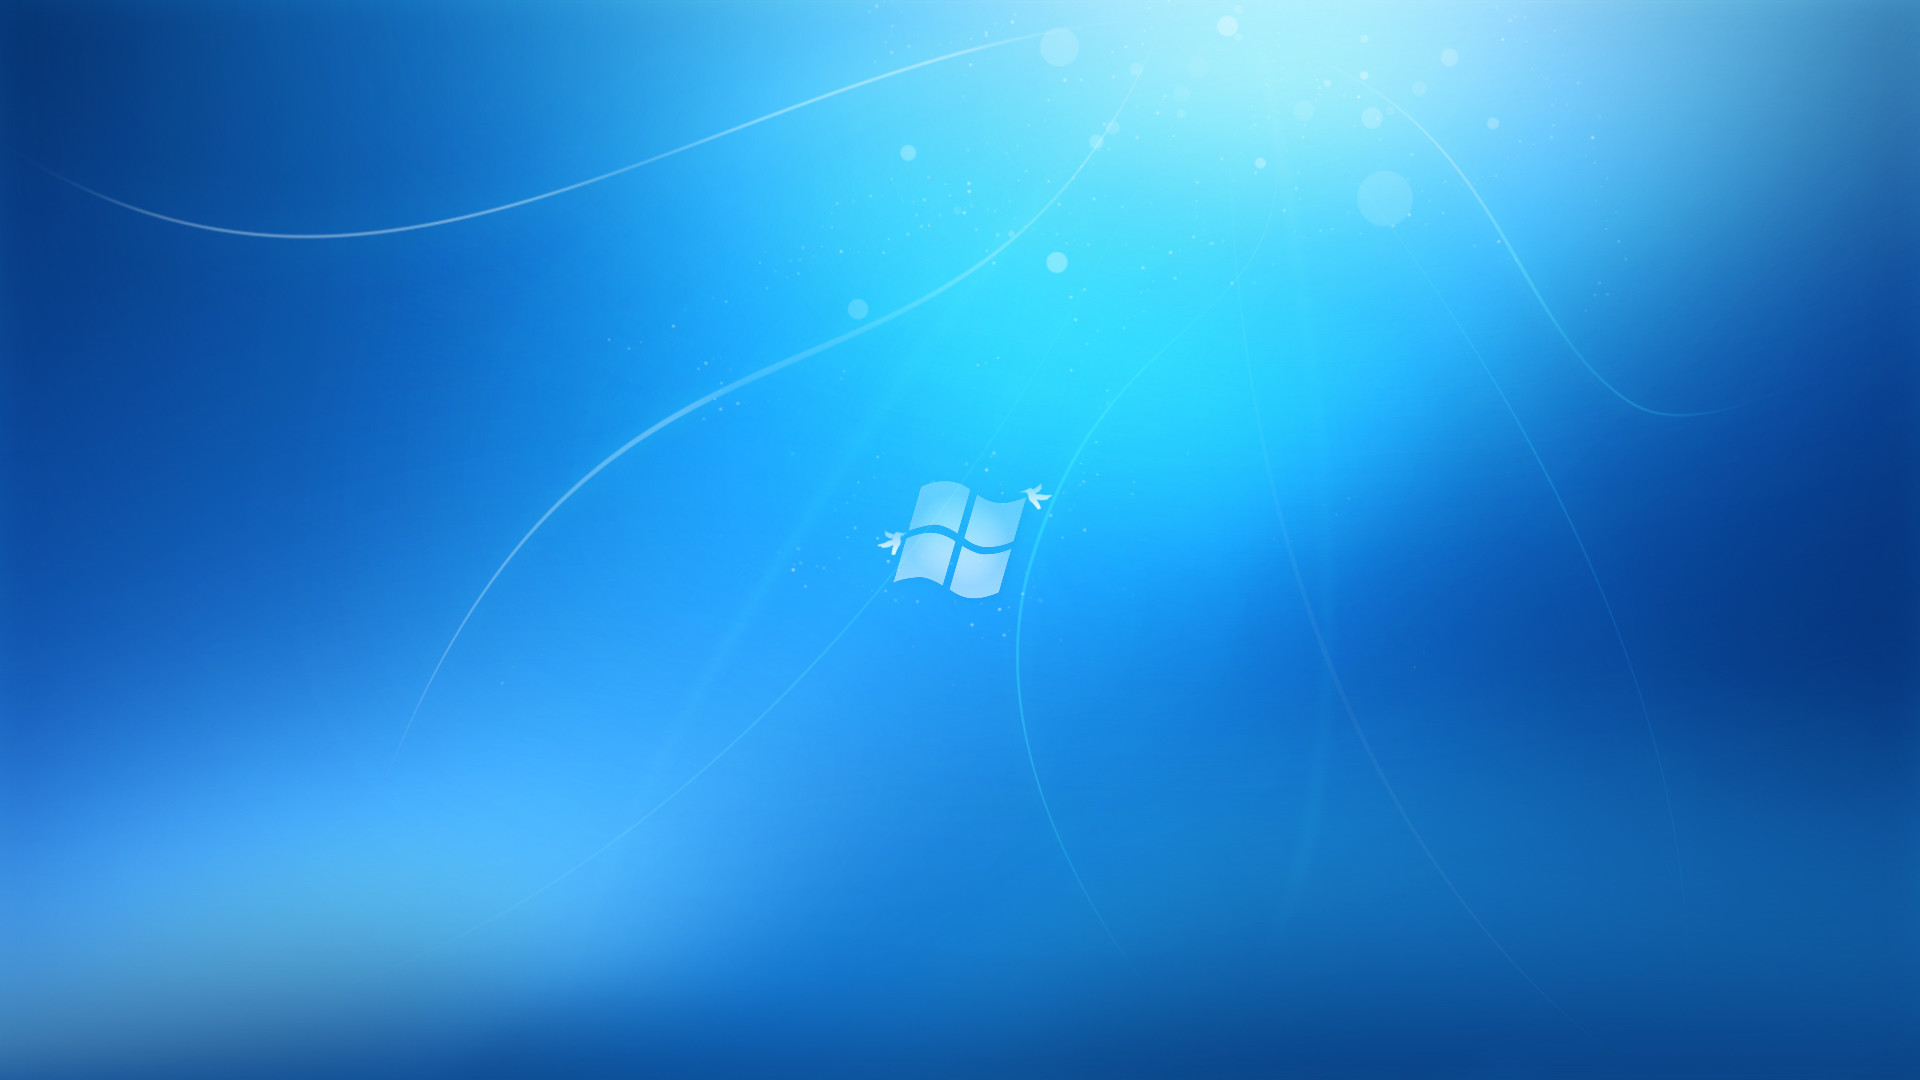 Windows 7 Hd Wallpapers 1080p 73 Pictures Images, Photos, Reviews